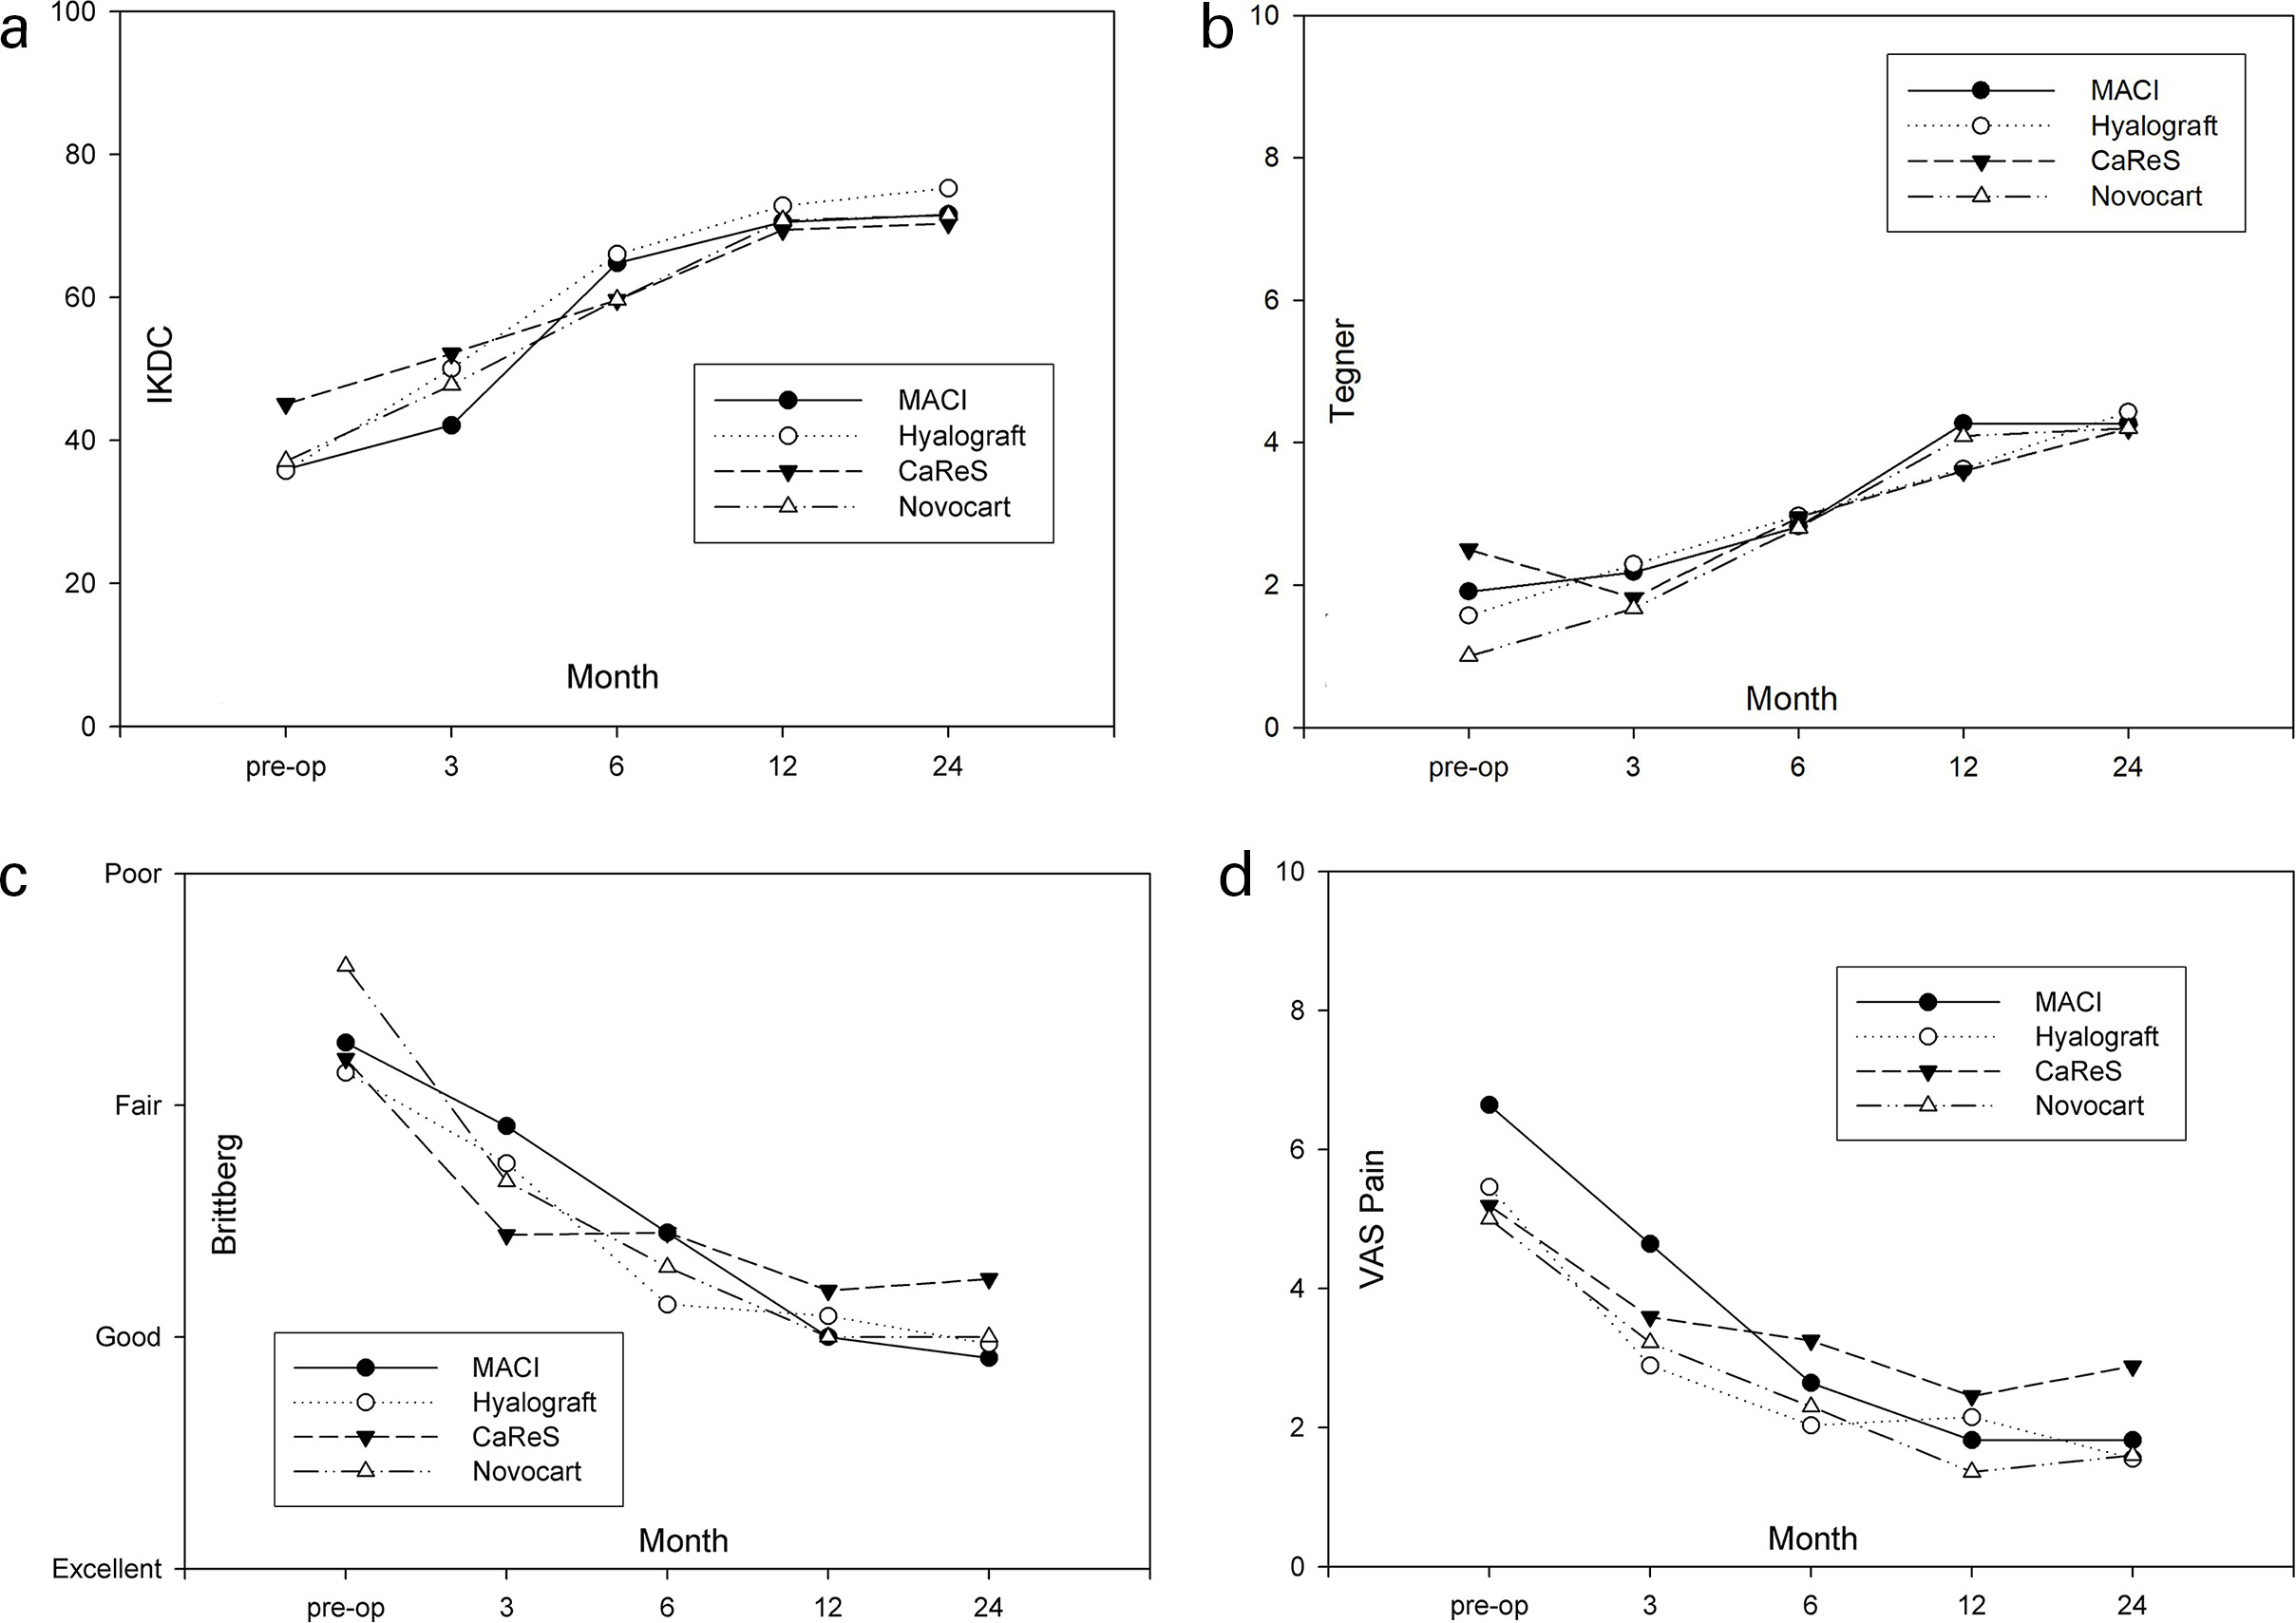 Fig. 3 
          a) International Knee Documentation Committee (IKDC) Subjective Knee Form, b) Tegner Activity Scale, c) Brittberg, and d) visual analogue scale (VAS) for pain mean scores in patients treated with matrix-associated chondrocyte transplantation with four different matrices over time. CaReS, Cartilage Regeneration System; MACI, matrix-associated autologous chondrocyte implantation.
        